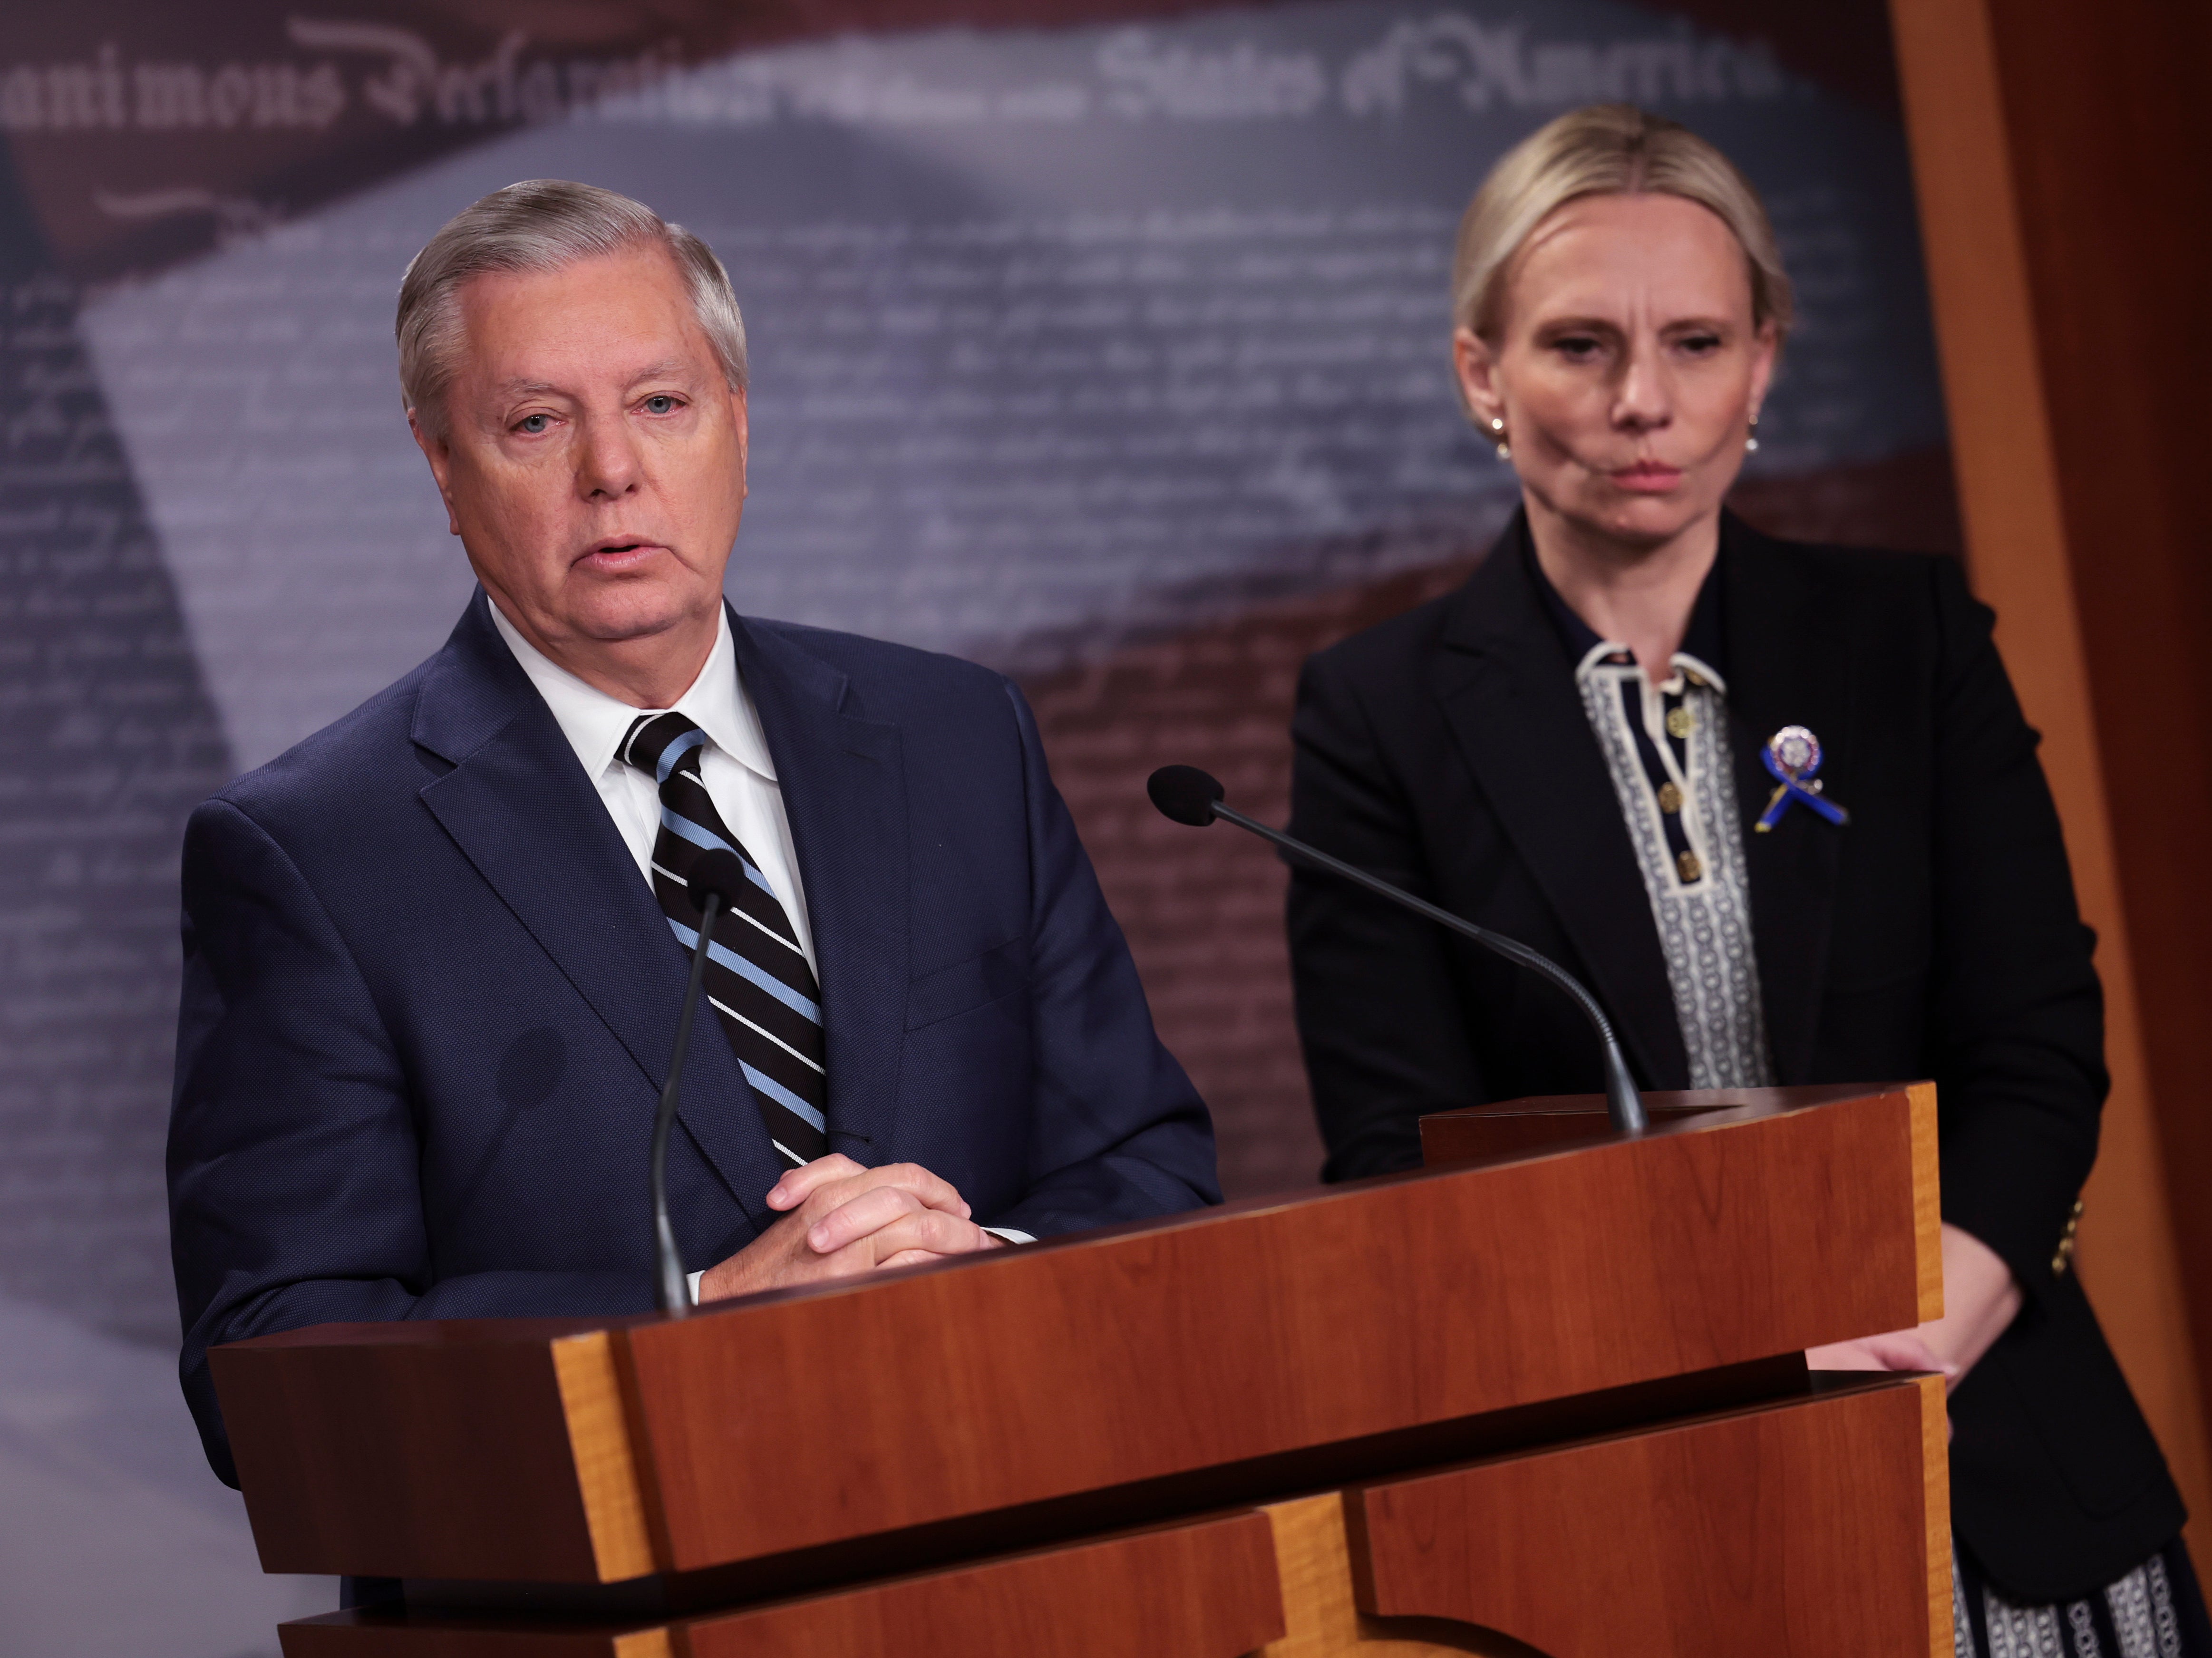 U.S. Sen. Lindsey Graham (R-SC) and Ukrainian-American Rep. Victoria Spartz (R-IN) speak to reporters on Russia's invasion of Ukraine at the U.S. Capitol on March 02, 2022 in Washington, DC